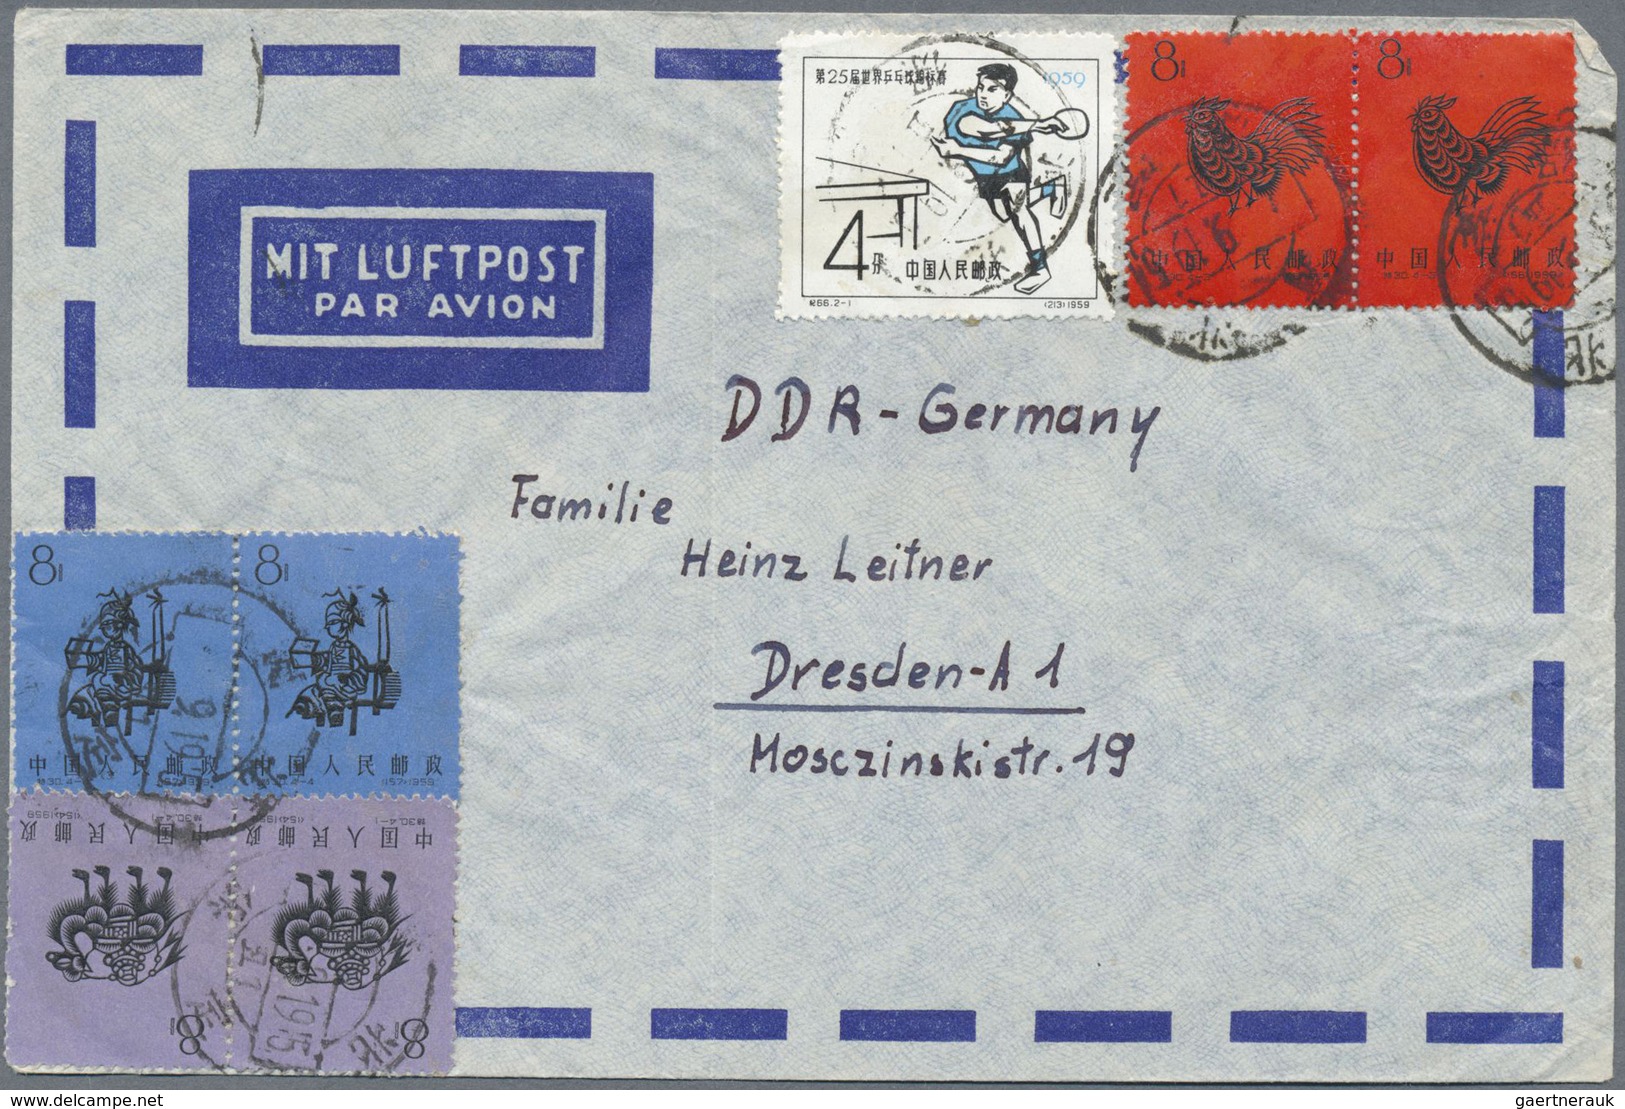 Br China - Volksrepublik: 1950/59, lot airmail covers (12) all used to East Germany inc. interesting Oc